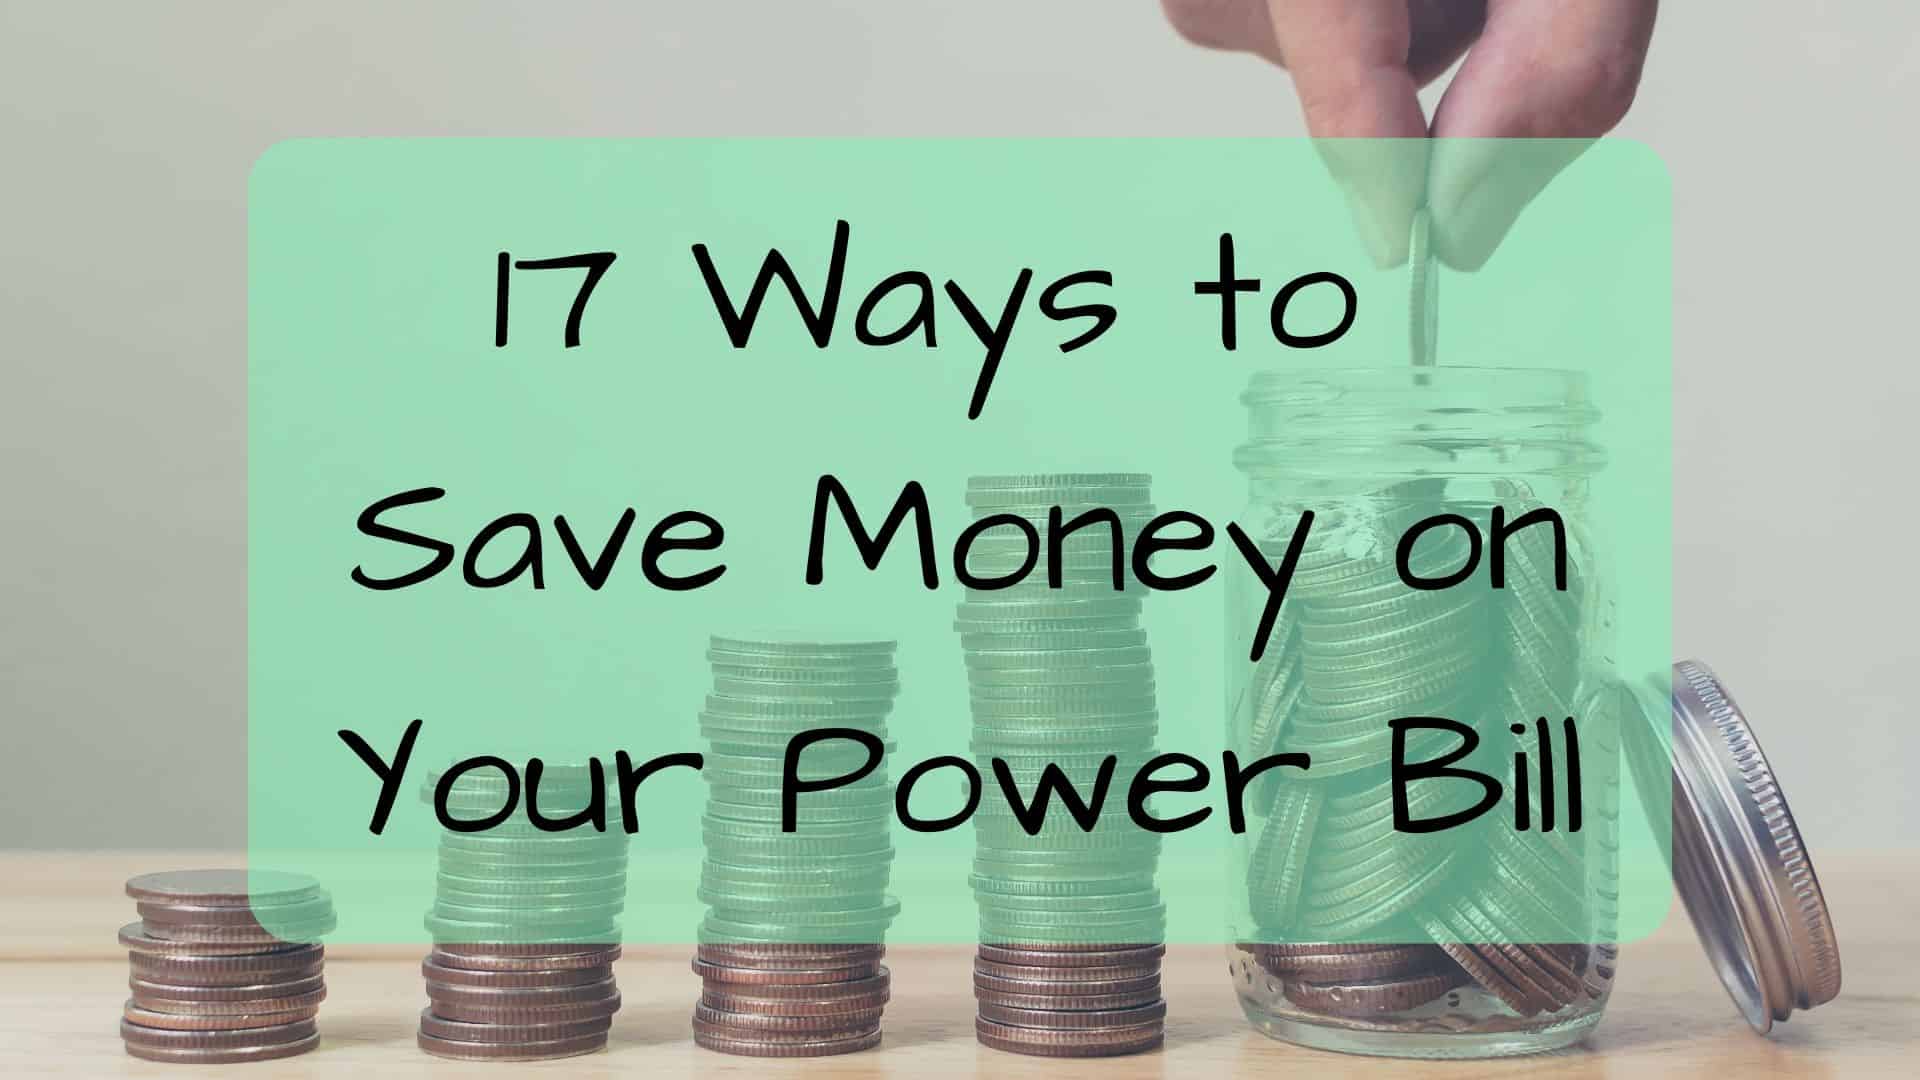 17 Ways to Save Money on Your Power Bill